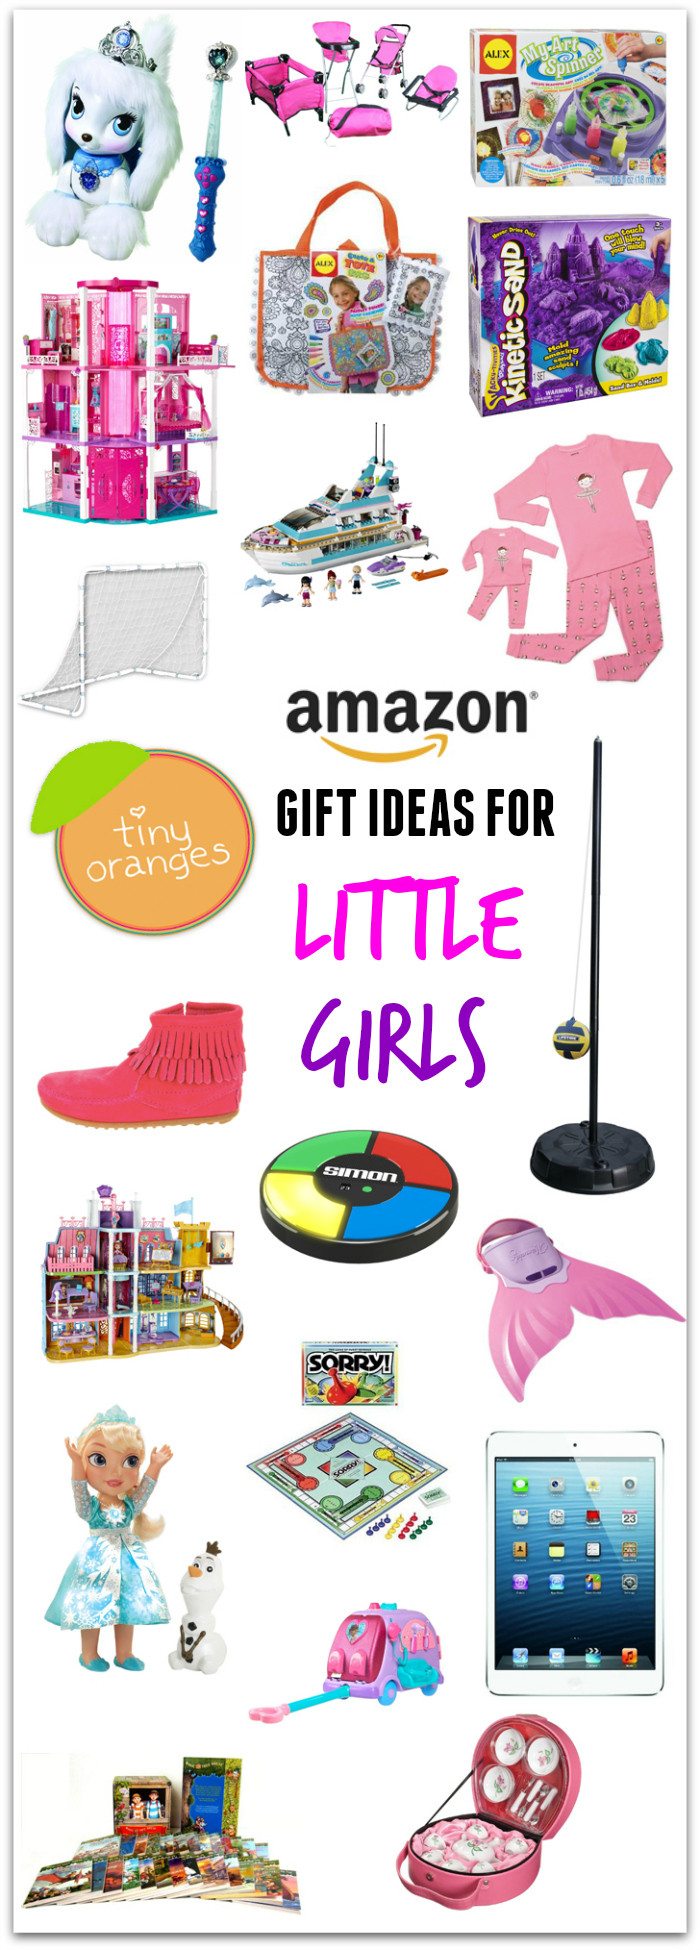 Gift Ideas For Little Girls
 Amazon Holiday Gift Ideas for Little Girls